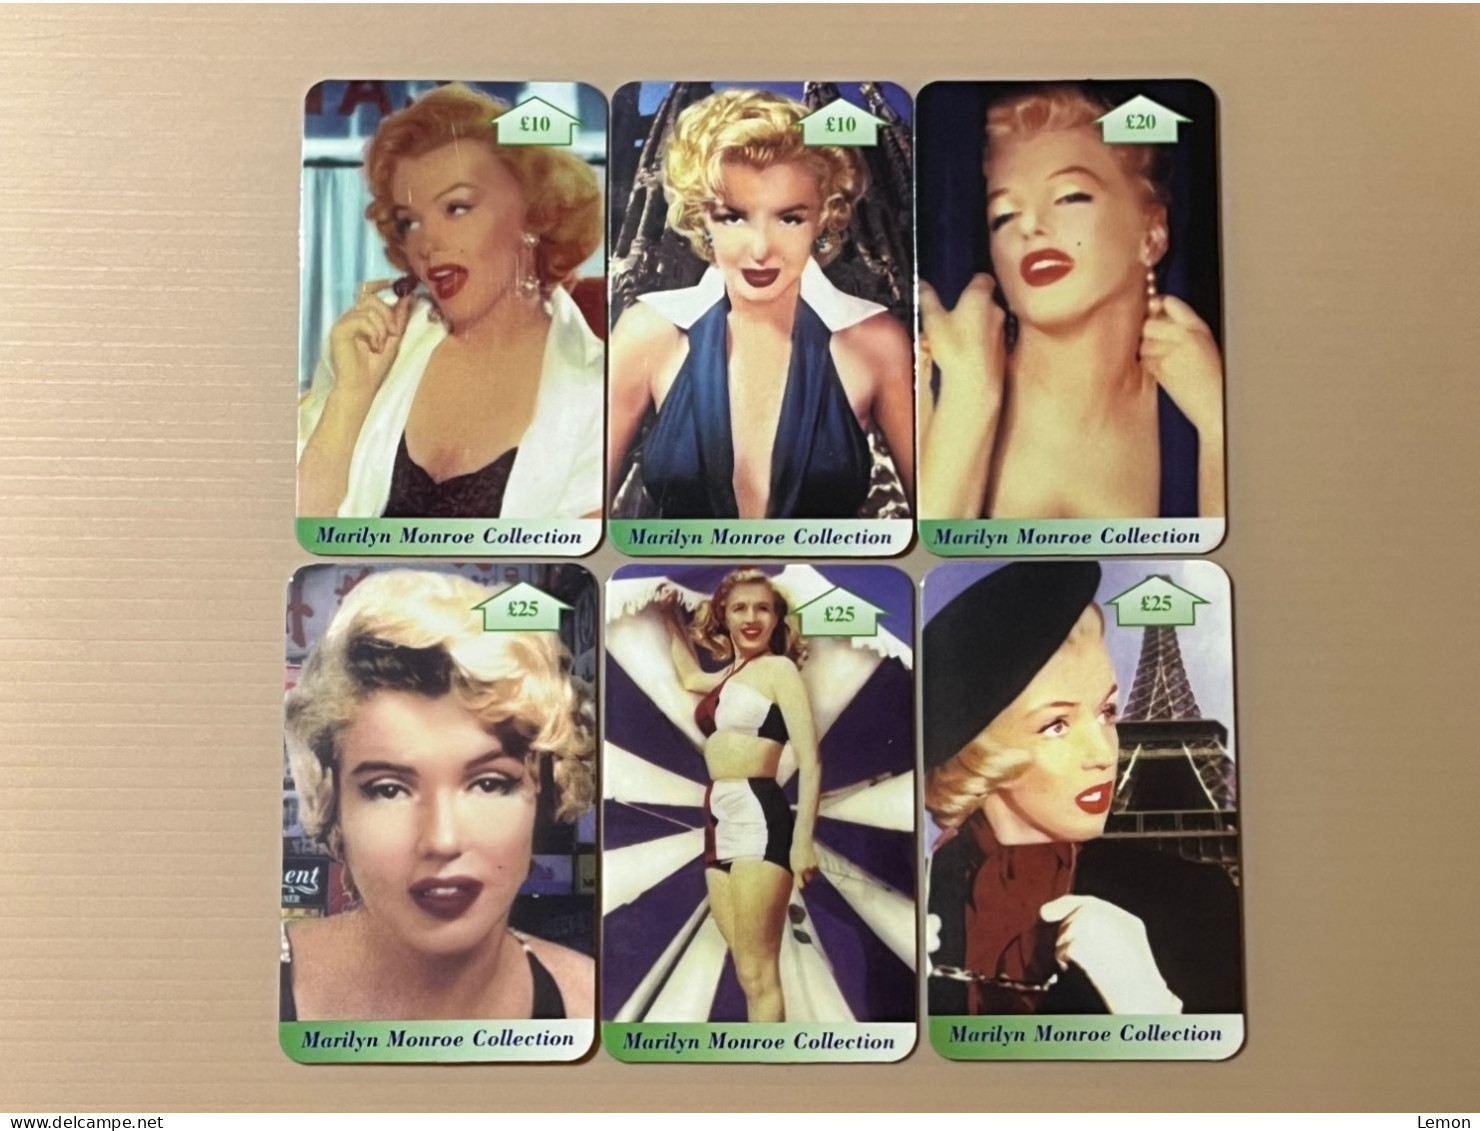 Mint UK United Kingdom - British Prepaid Telecard Phonecard - Marilyn Monroe Collection - Set Of 6 Mint Cards - Collections